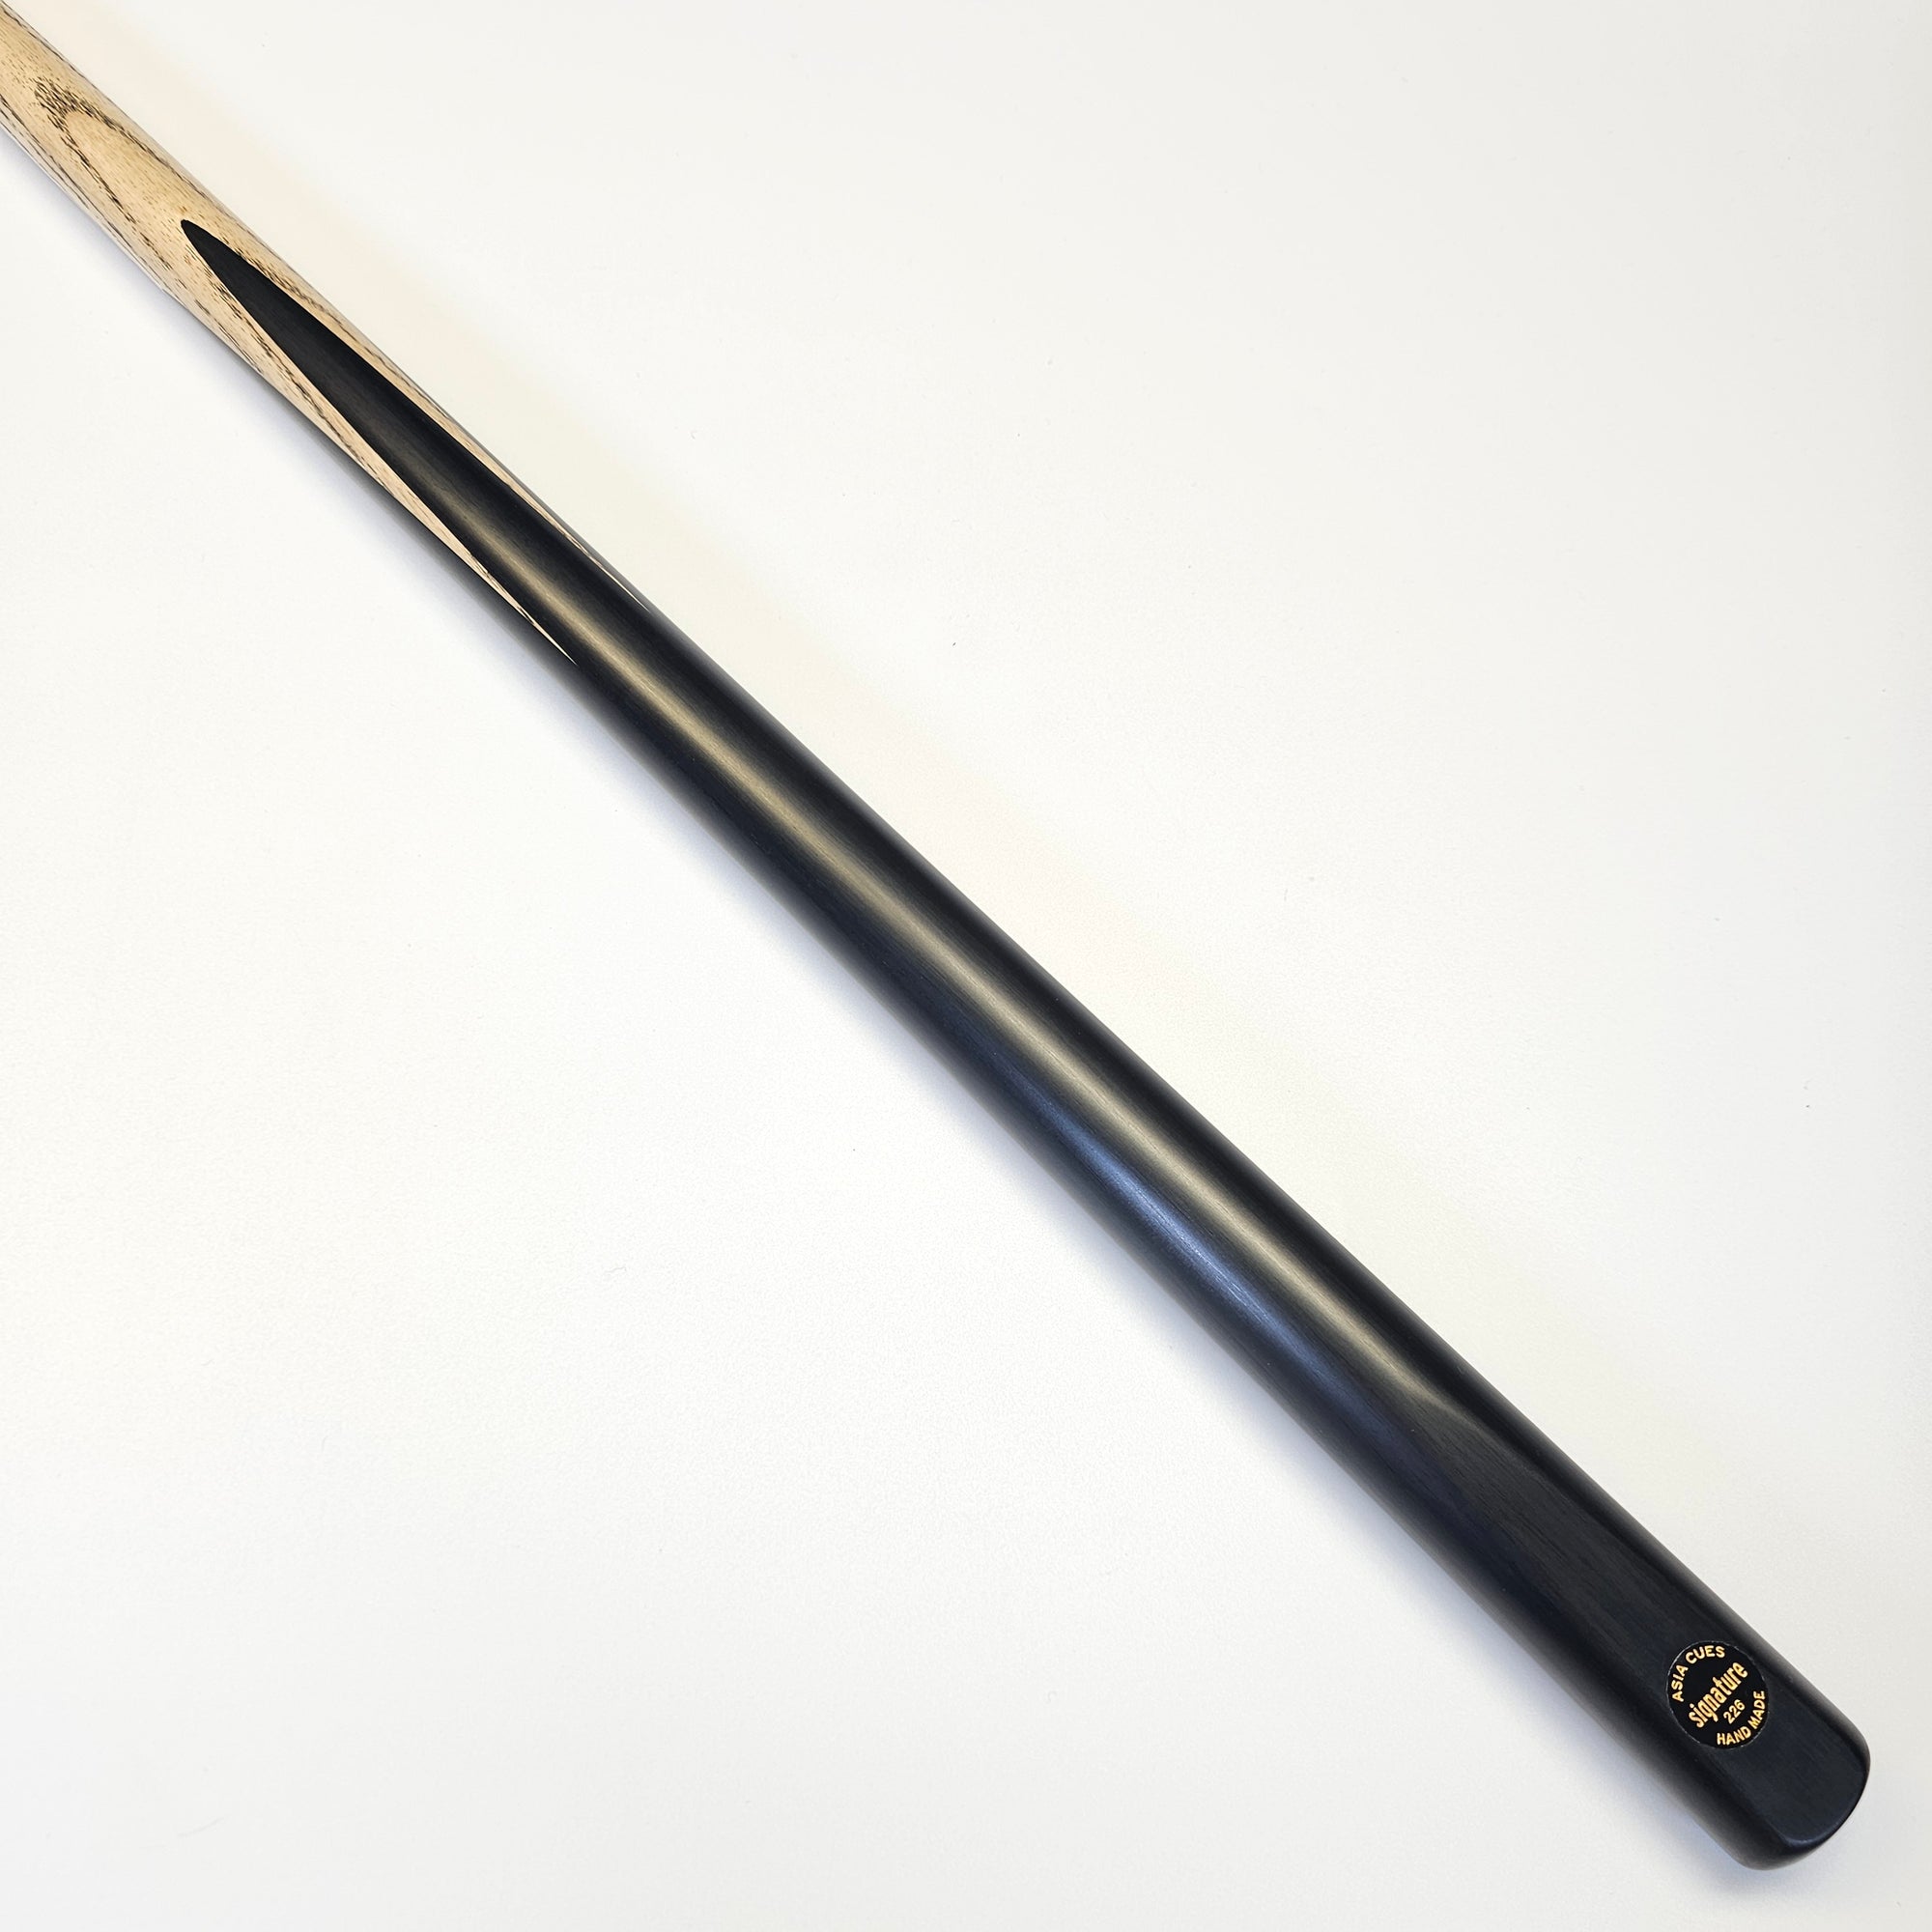 Asia Cues Signature No.226 - One Piece Snooker Cue 9.4mm Tip, 18.1